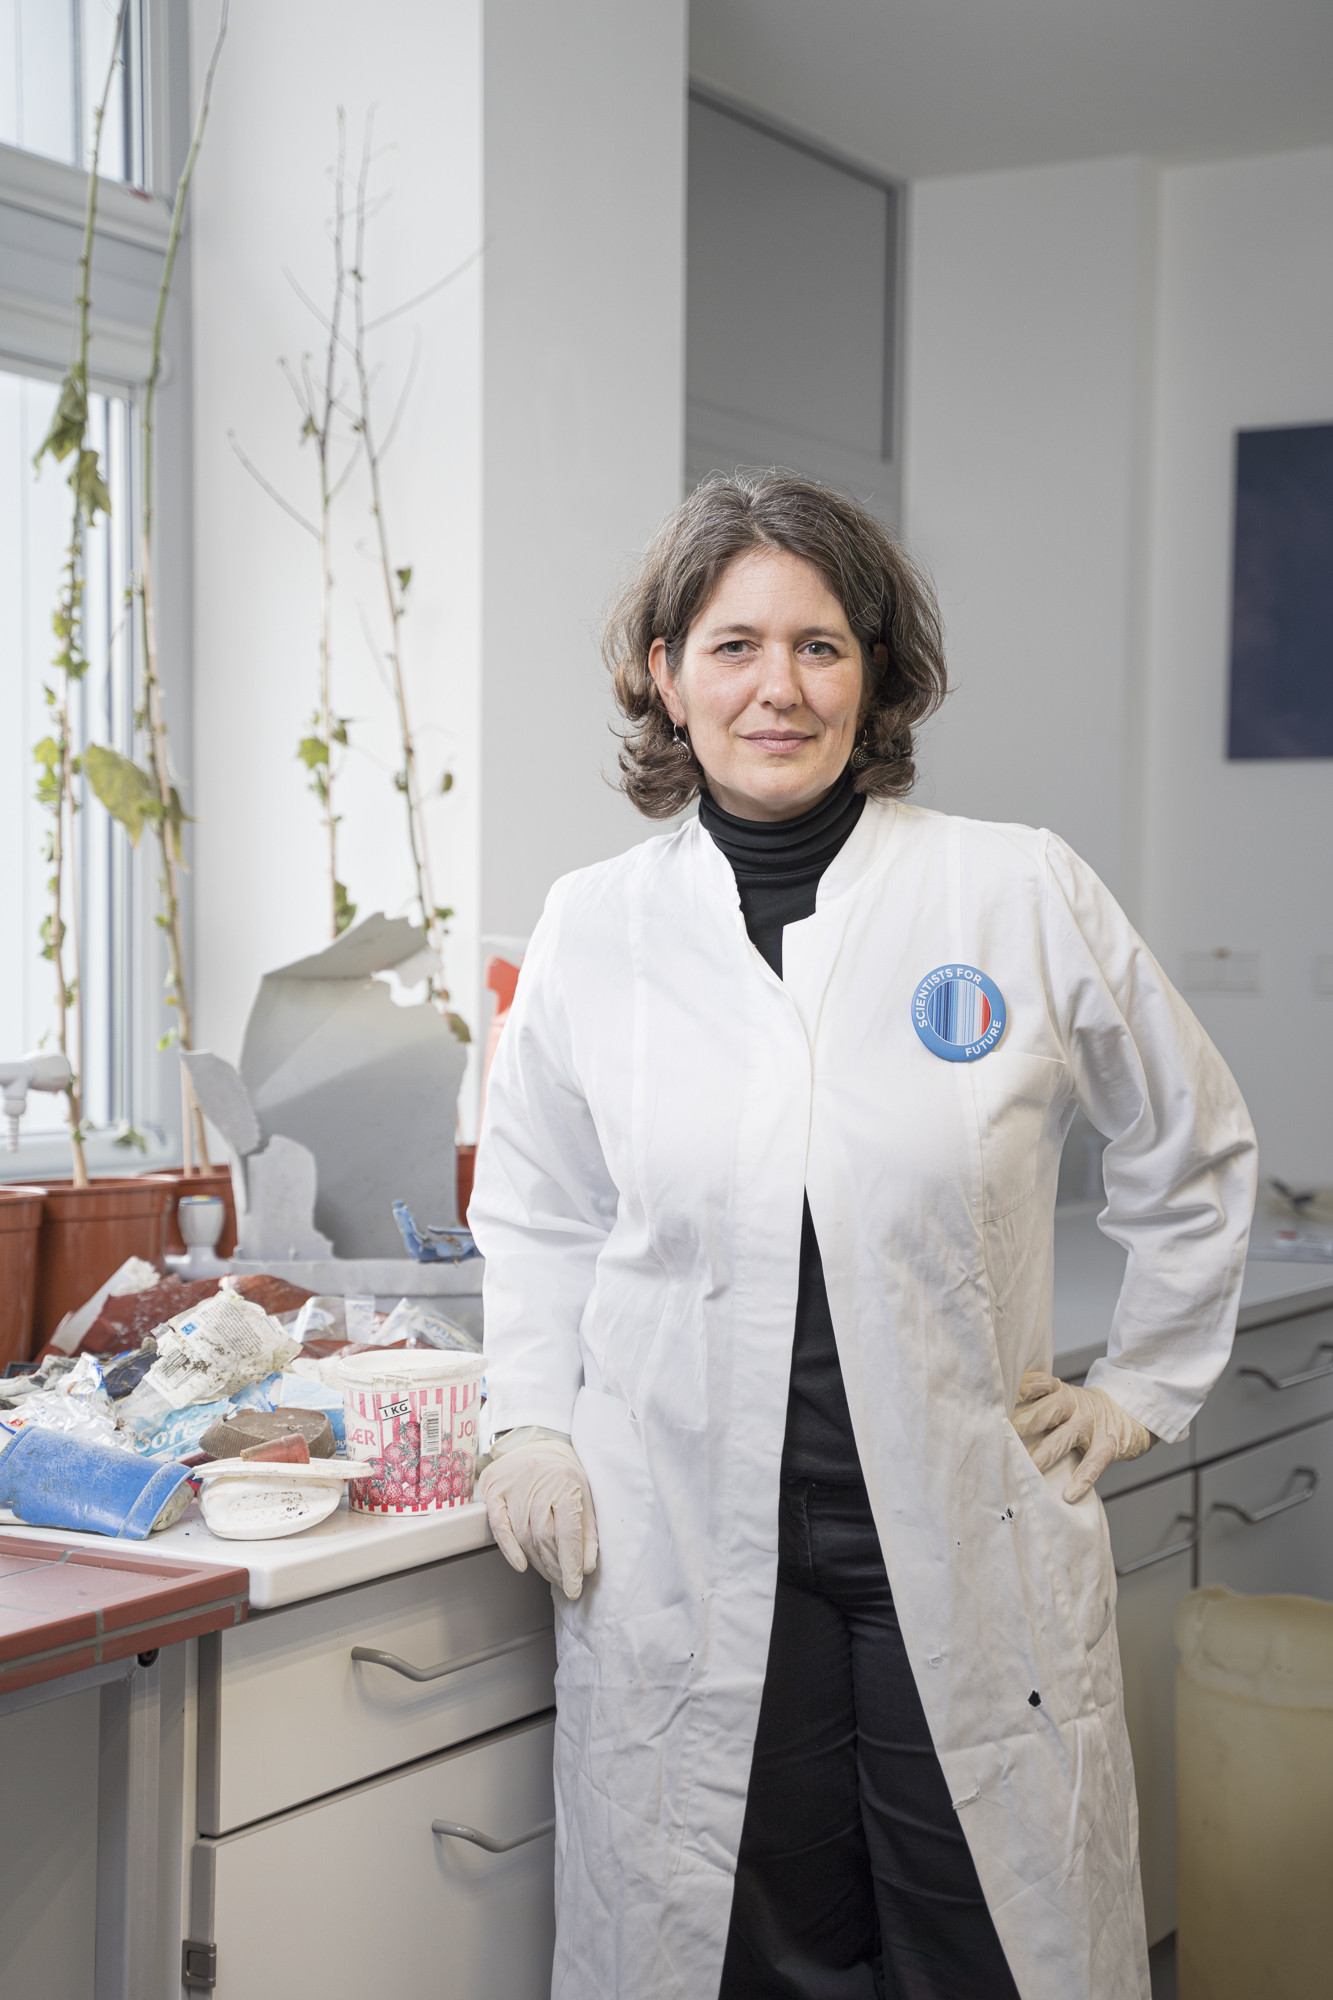 Scientist Melanie Bergmann in a white lab coat in front of a collection of plastic waste